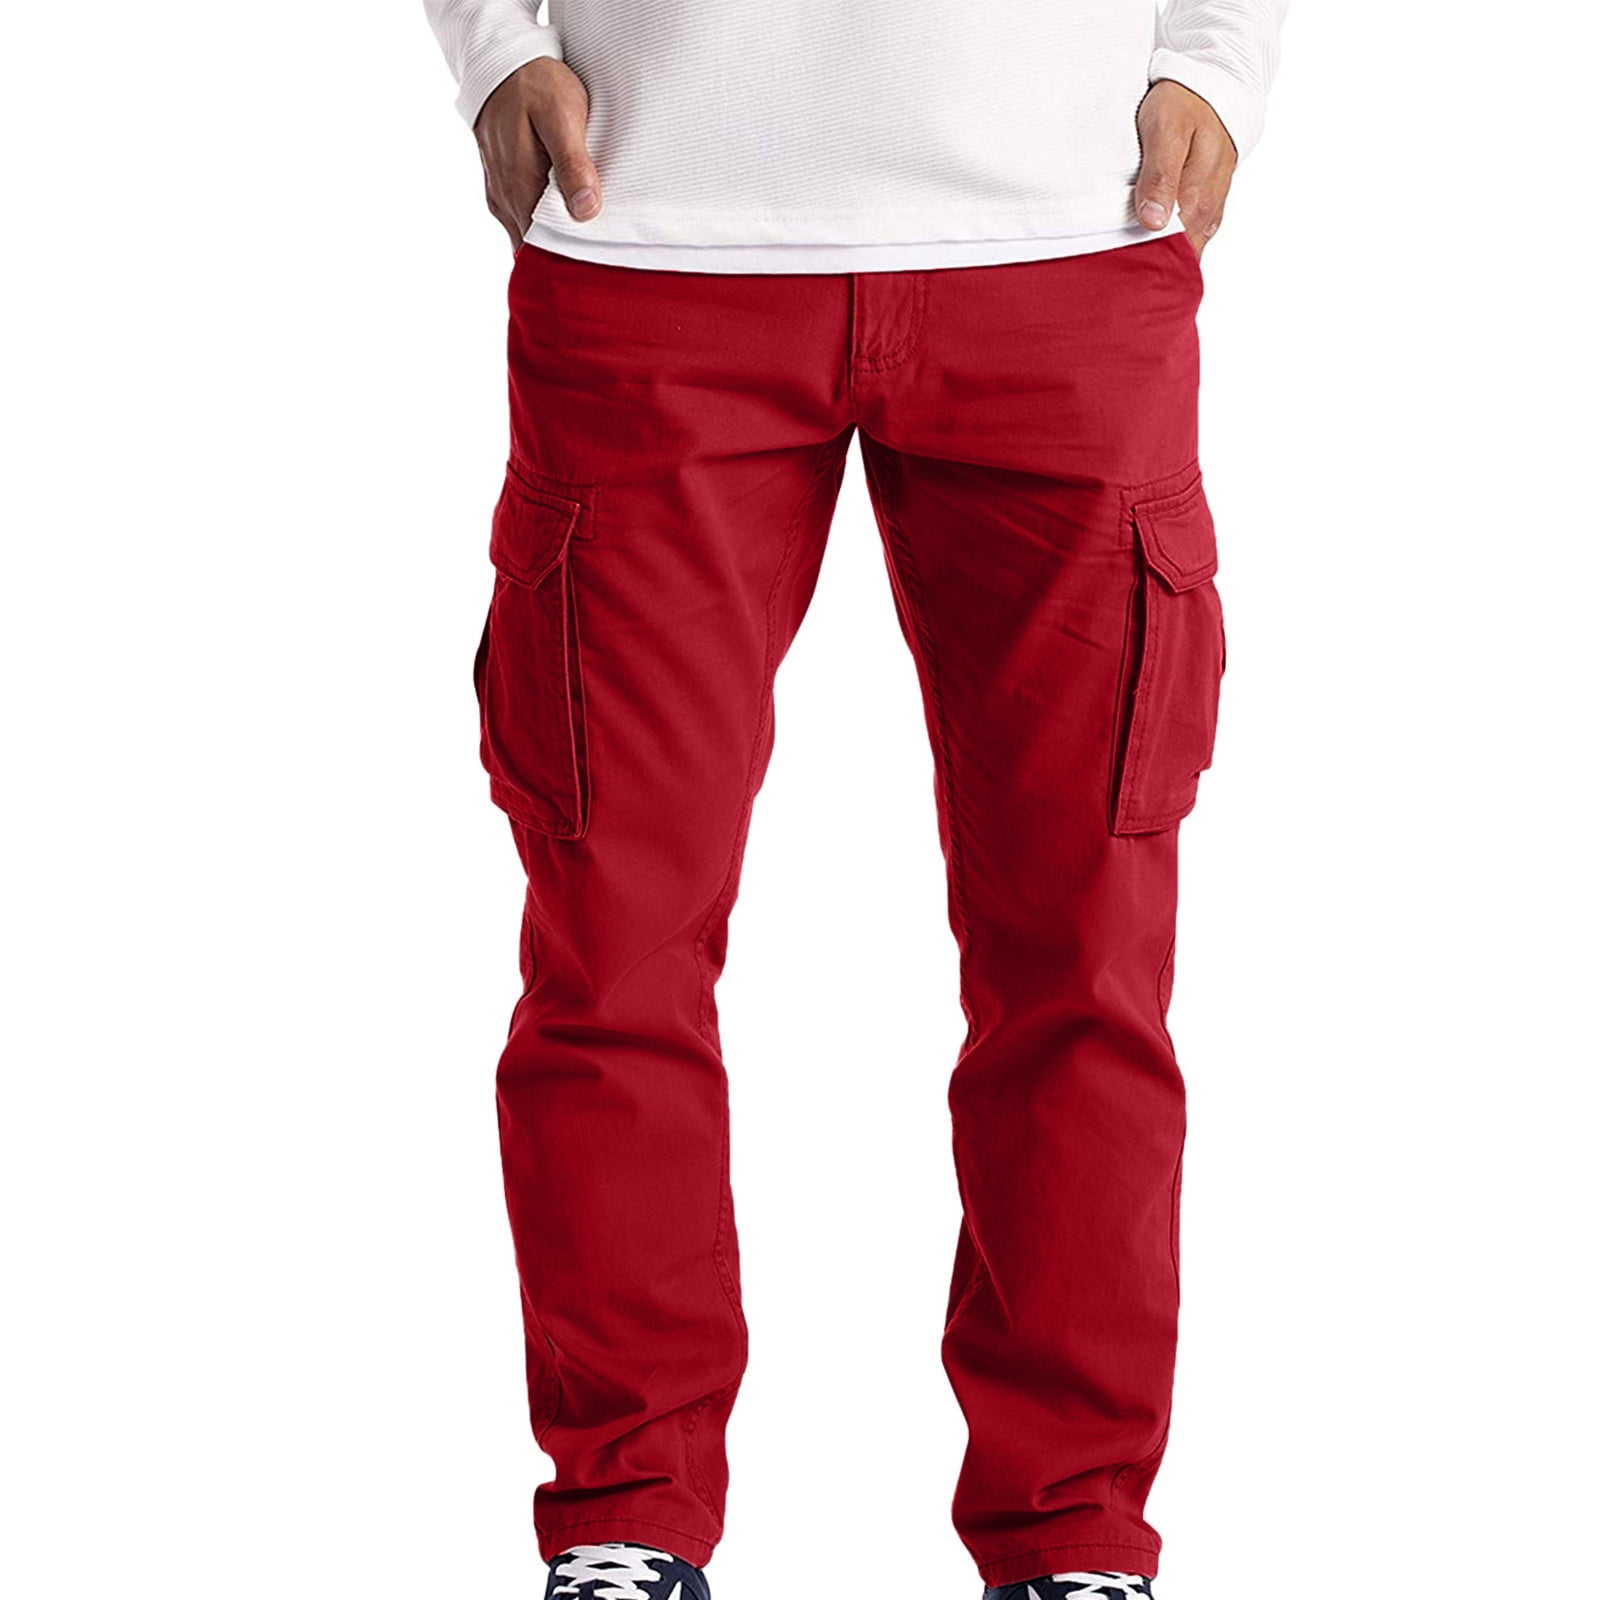 Buy RED Trousers  Pants for Men by Rare Rabbit Online  Ajiocom